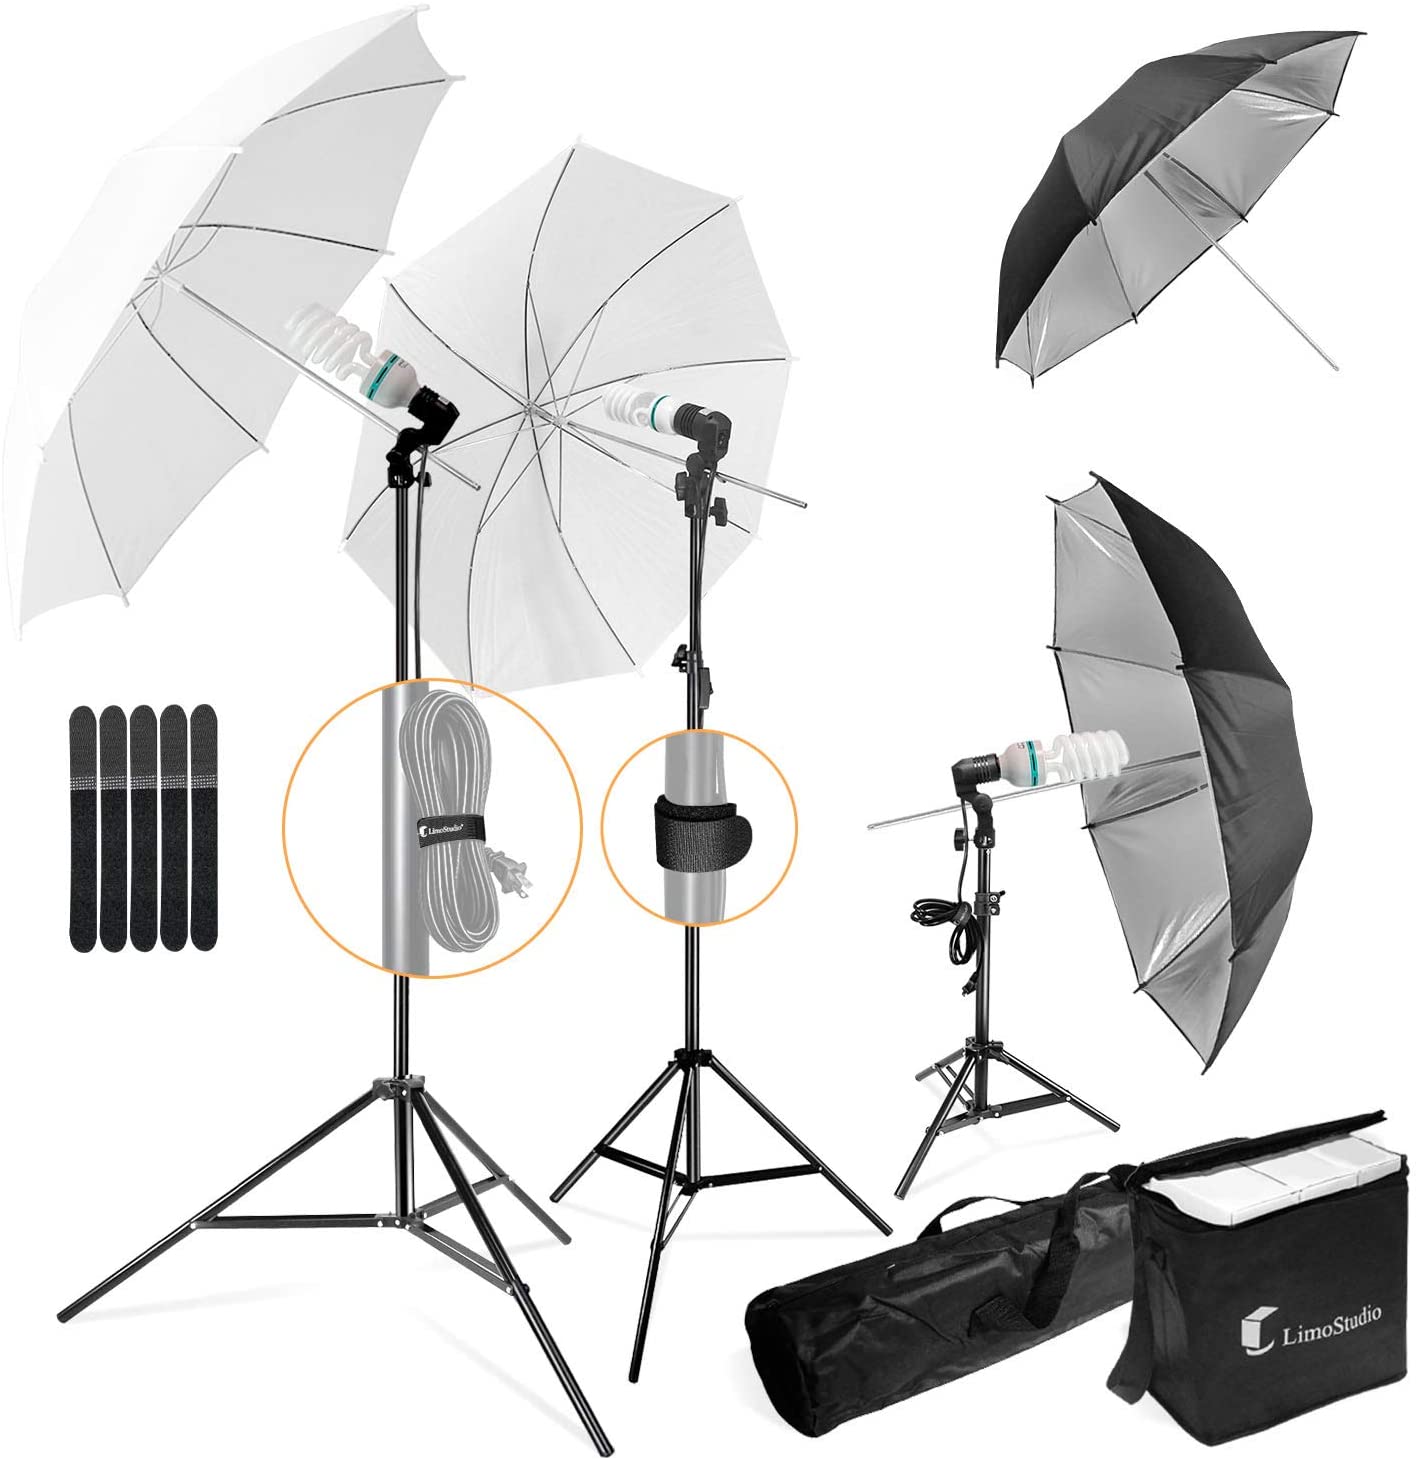 Studio Lighting 700W Output, Soft Continuous Lighting Kit for White and Black Umbrella Reflector with Accessory and Carry Bag